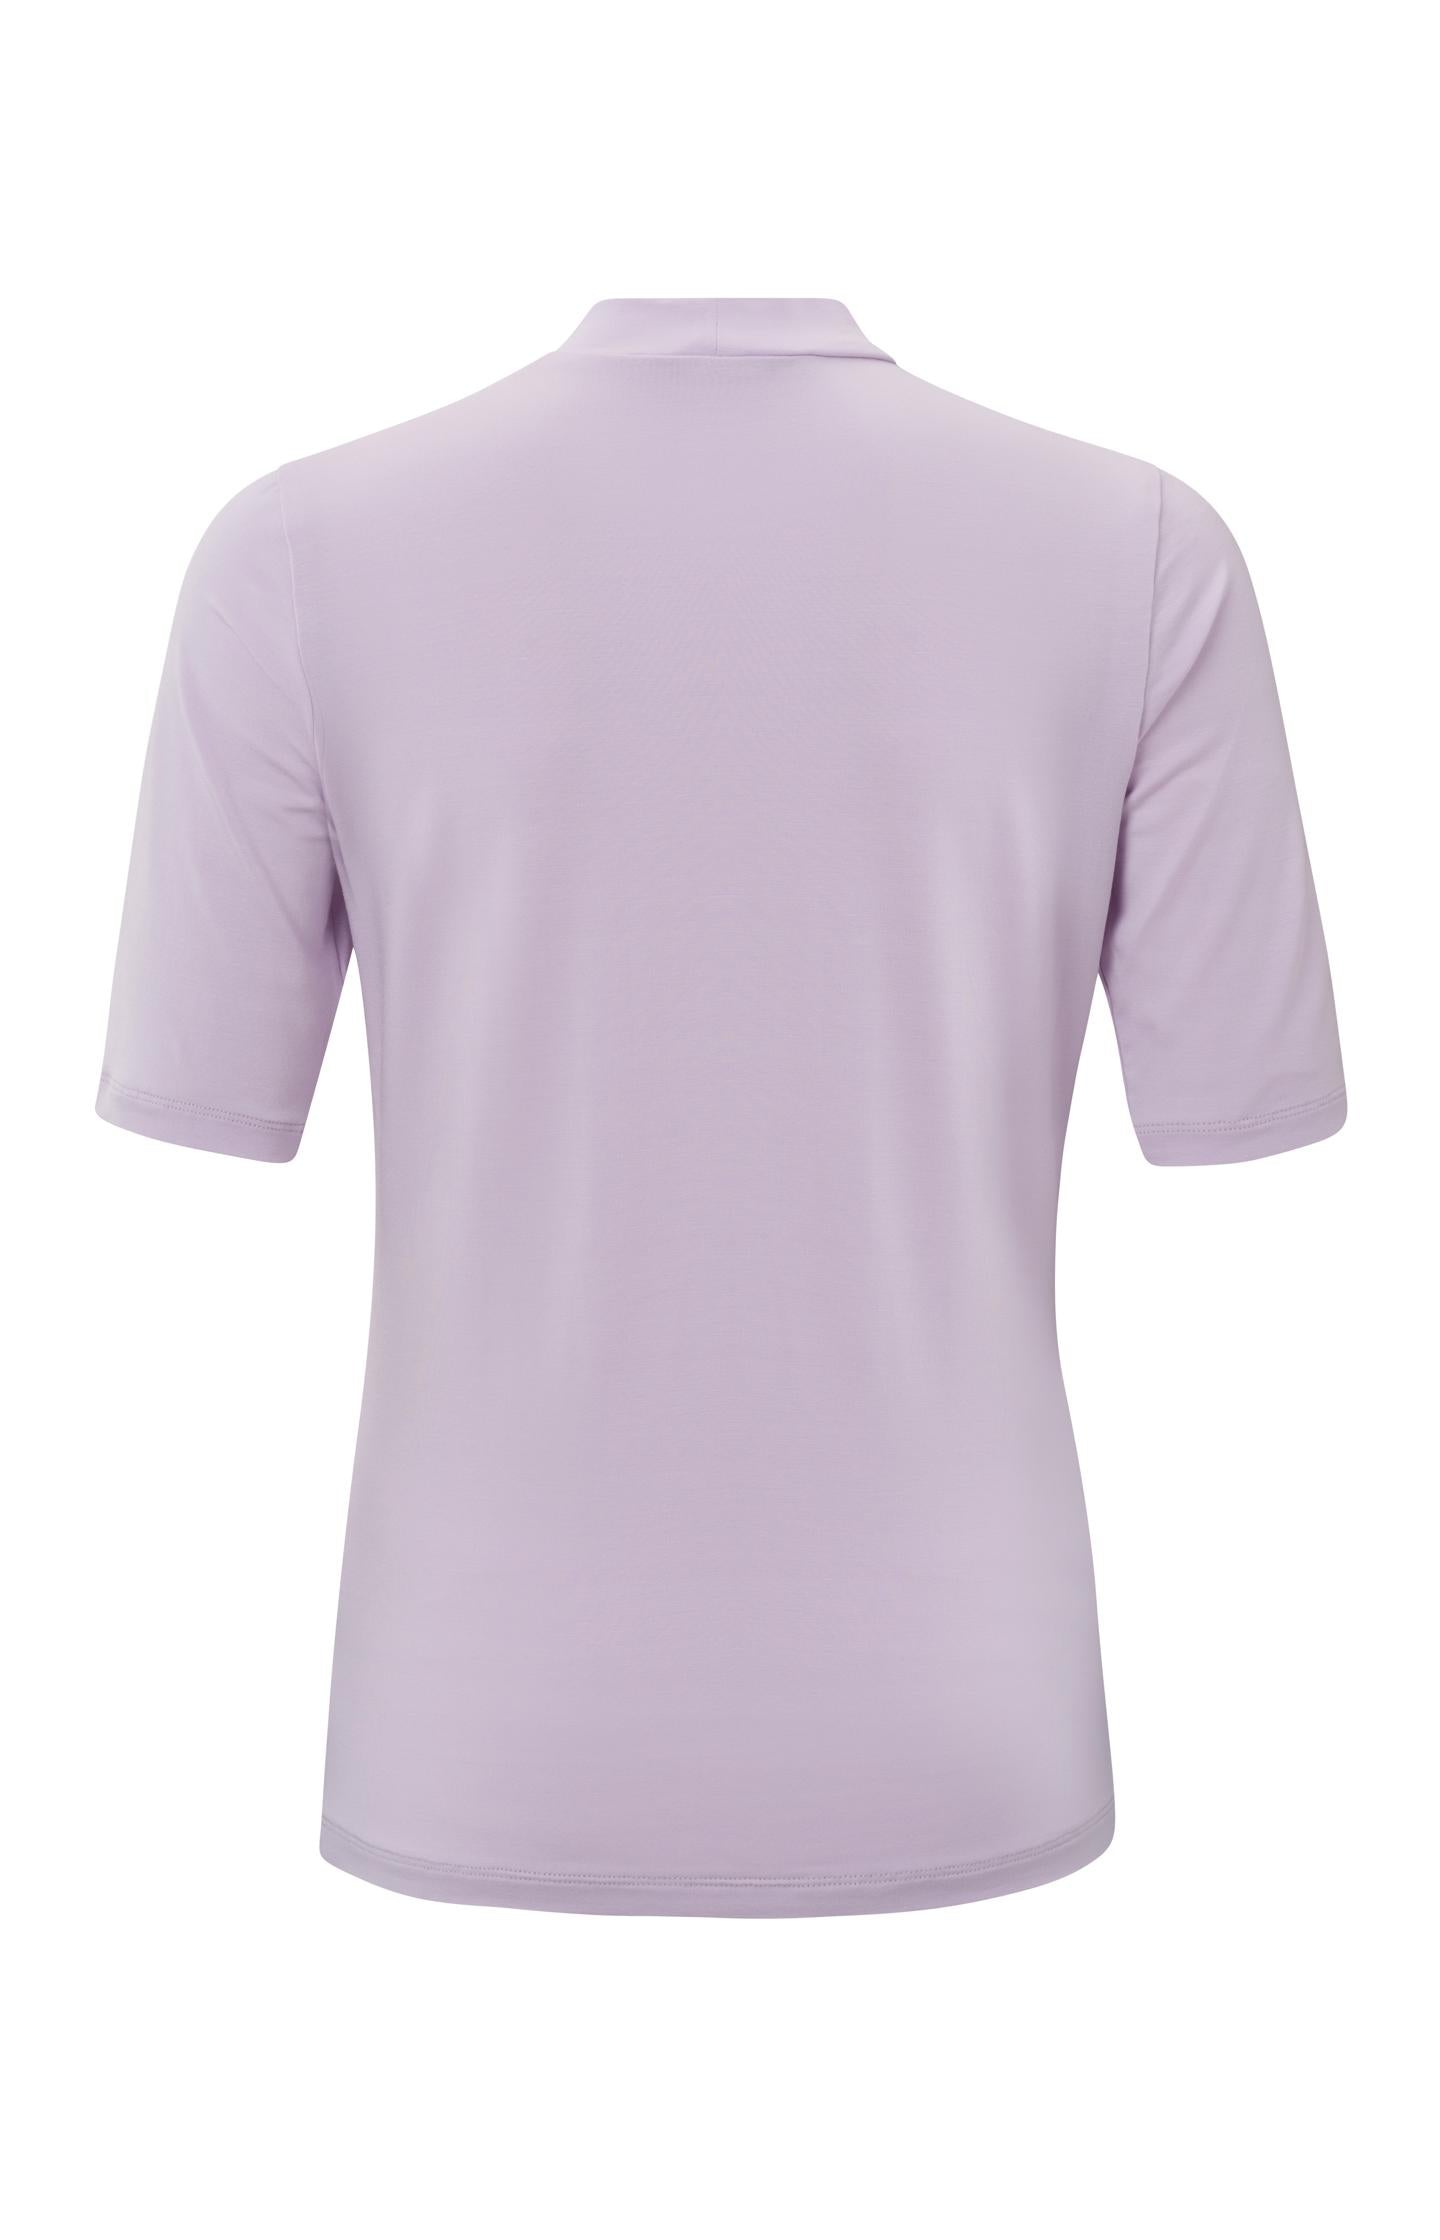 Soft T-shirt with turtleneck and short sleeve in regular fit